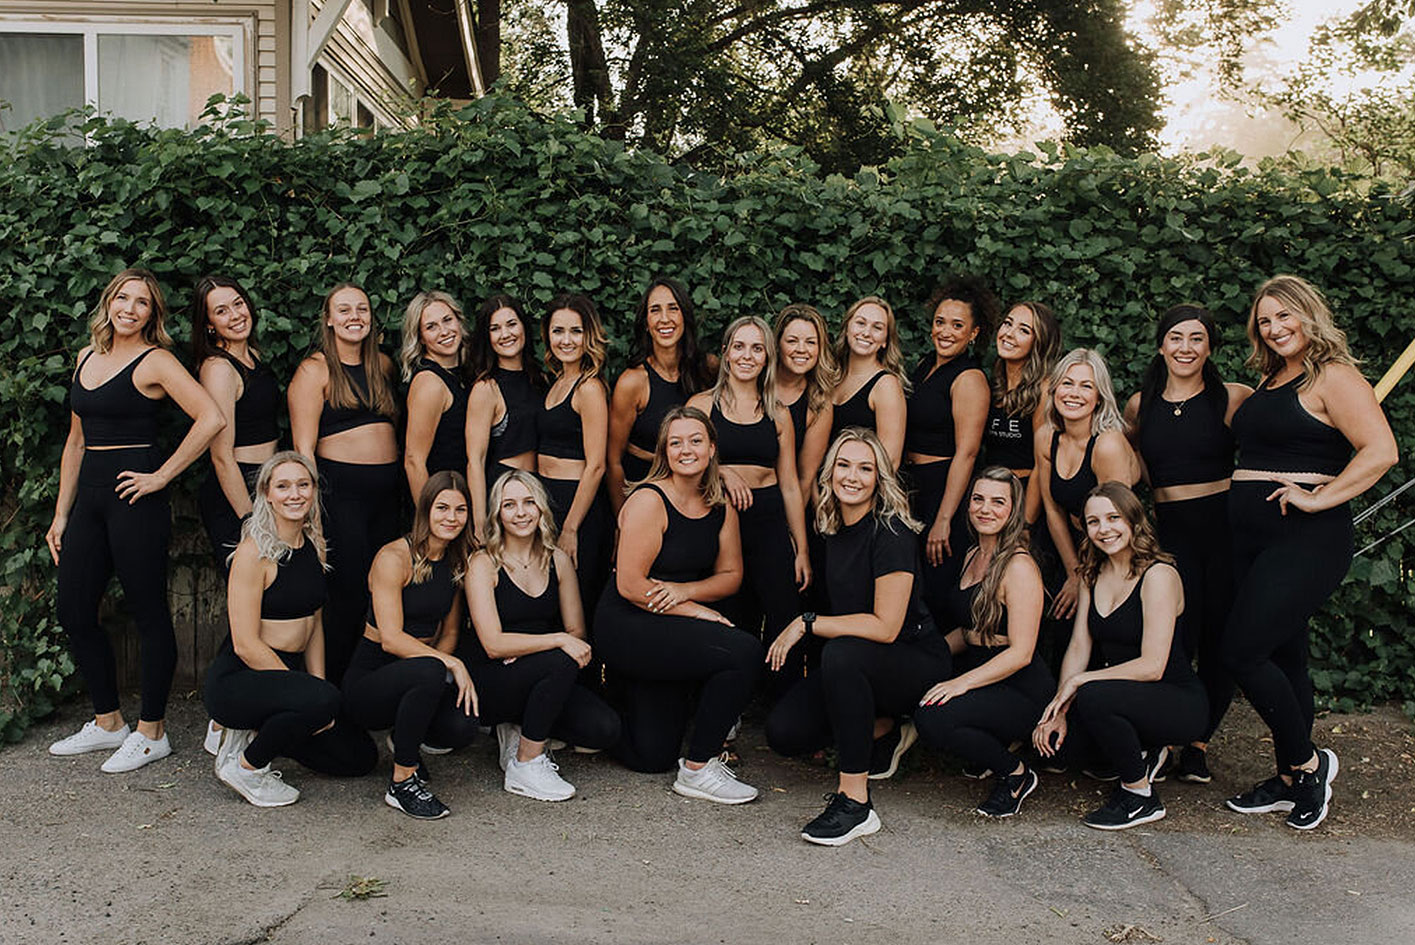 a large group of women posing infront of a bush thwy ar all wearing black